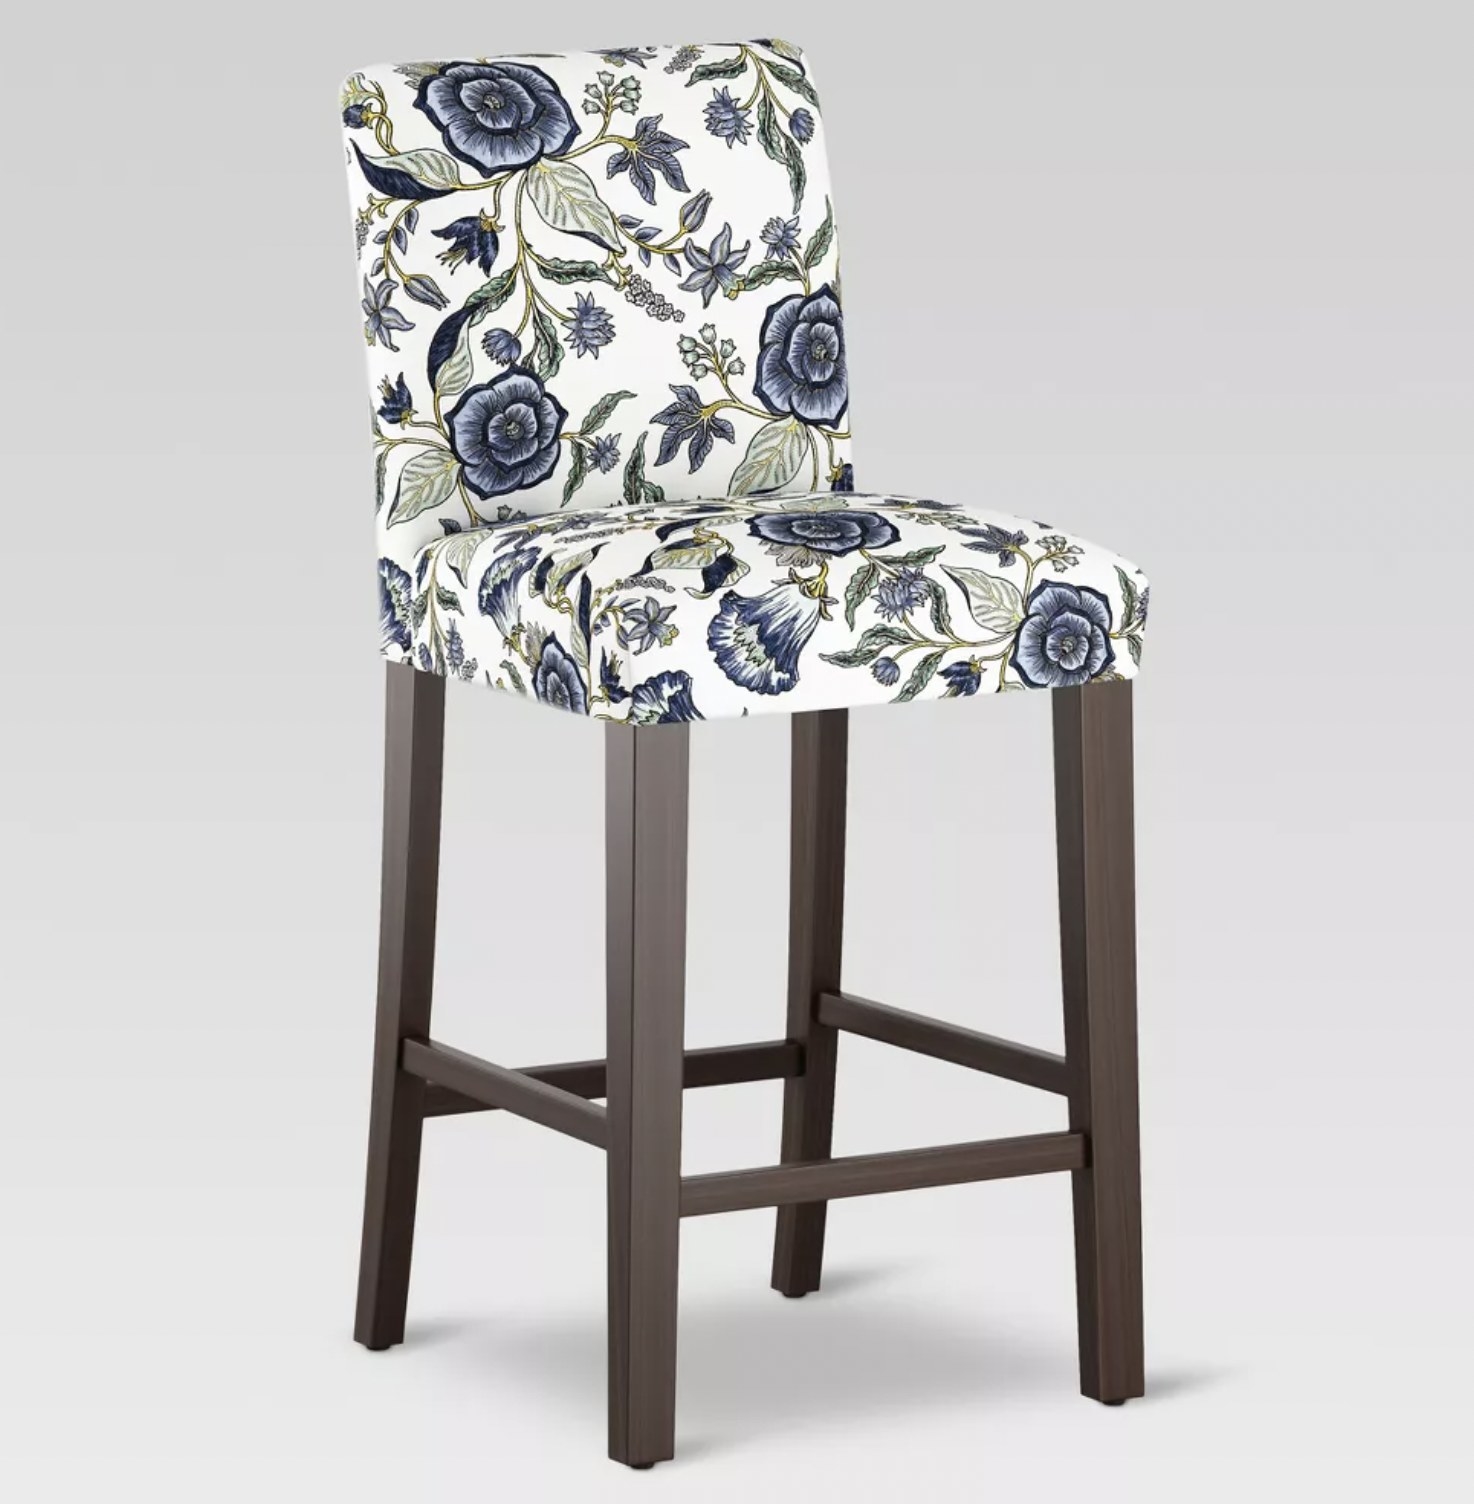 The floral barstool